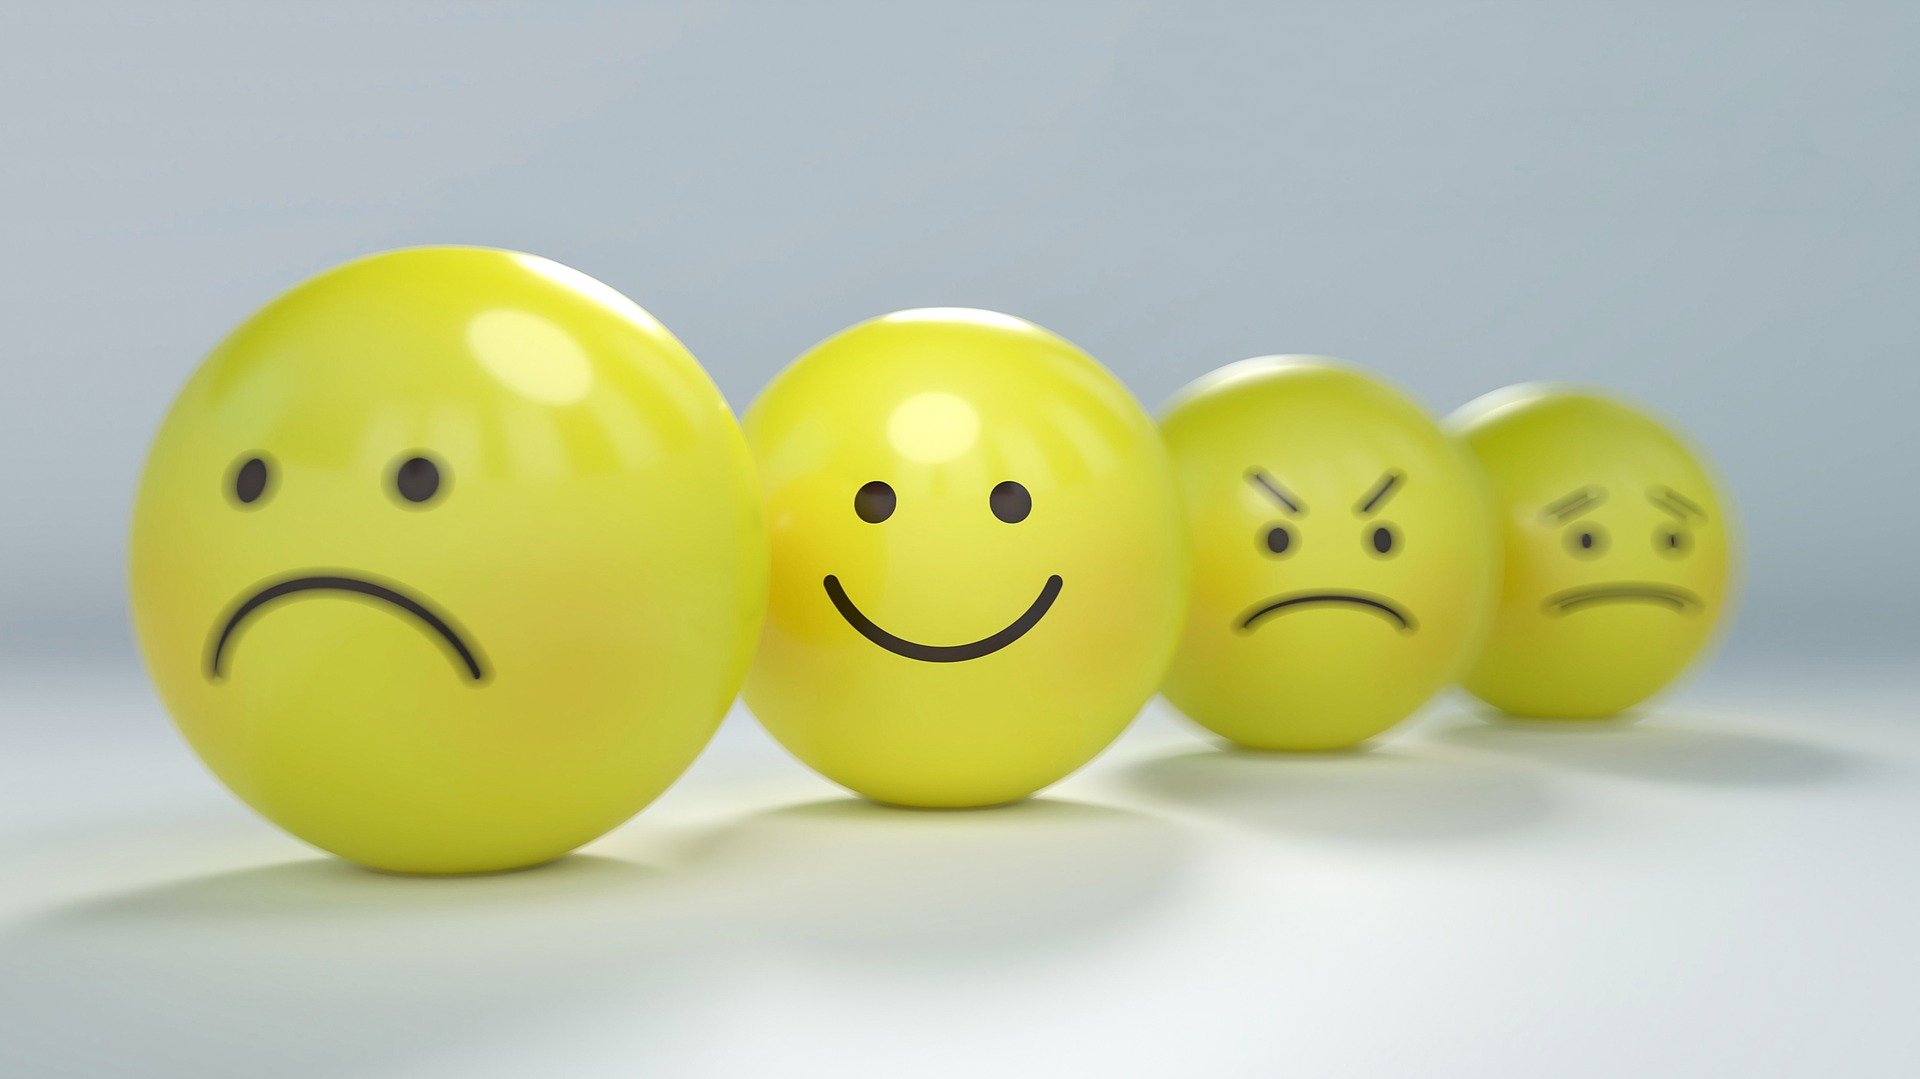 image of a line of yellow balls with emoticon faces of different emotions